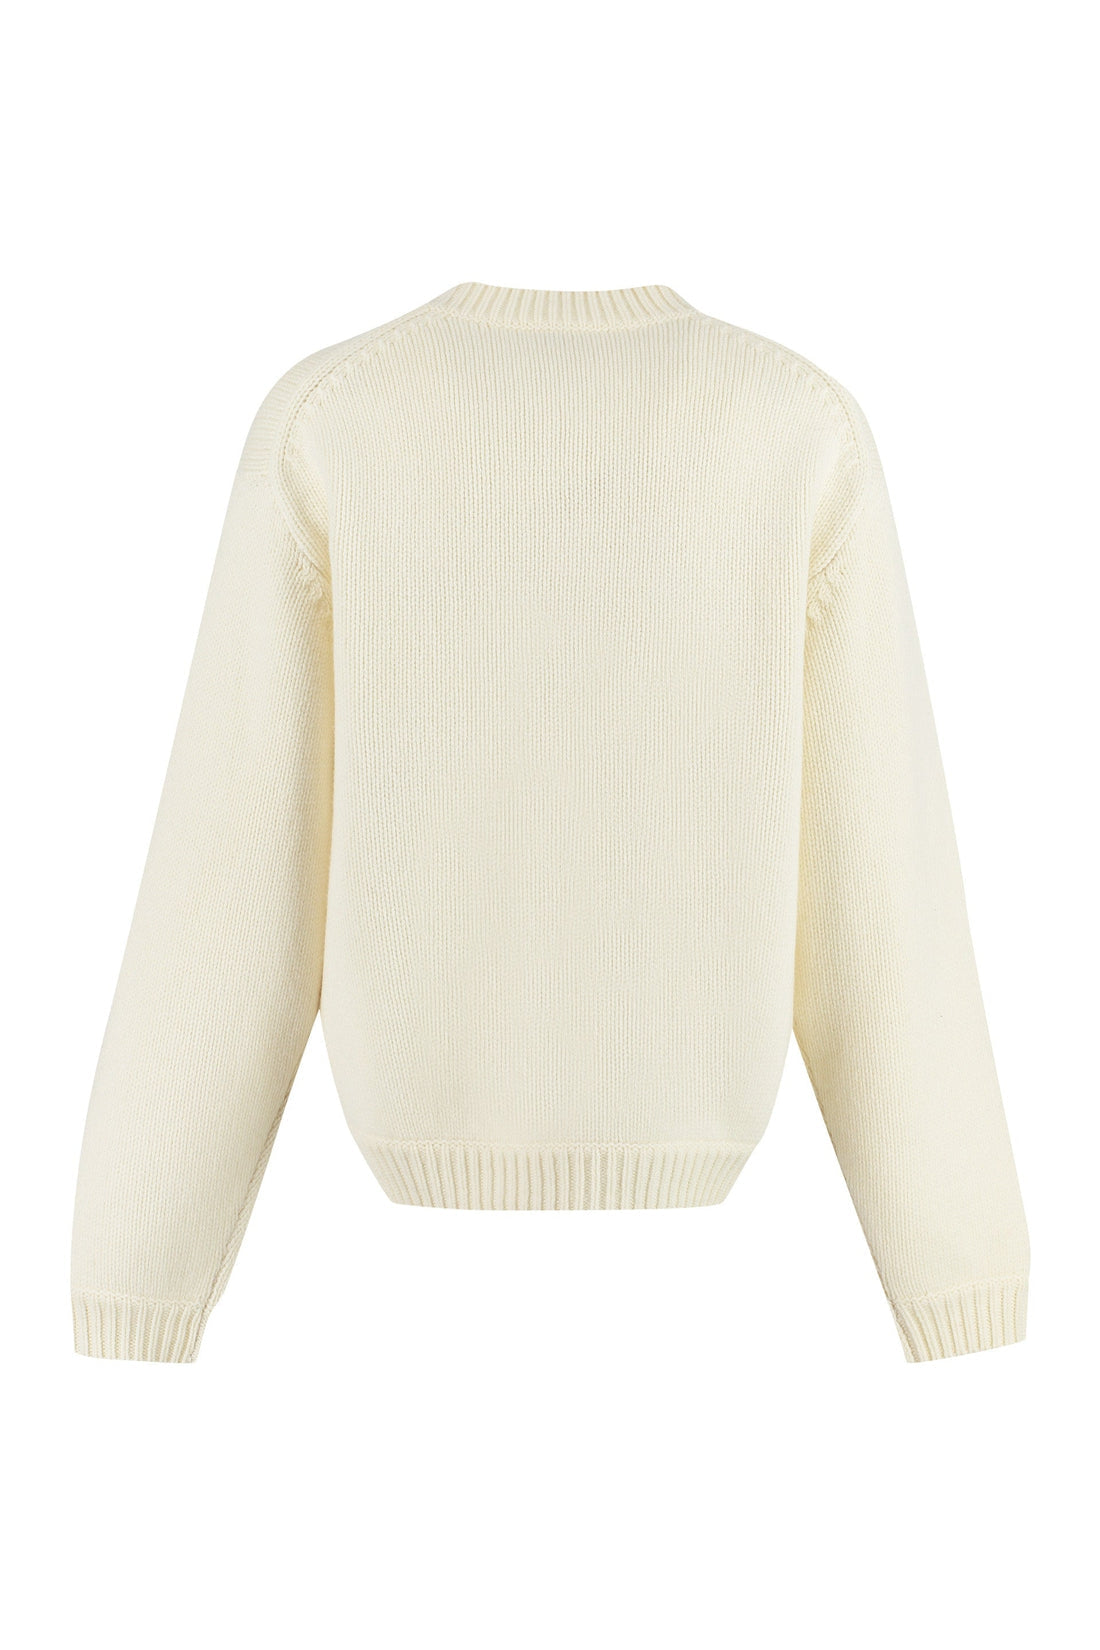 Kenzo-OUTLET-SALE-Cotton-wool blend sweater-ARCHIVIST